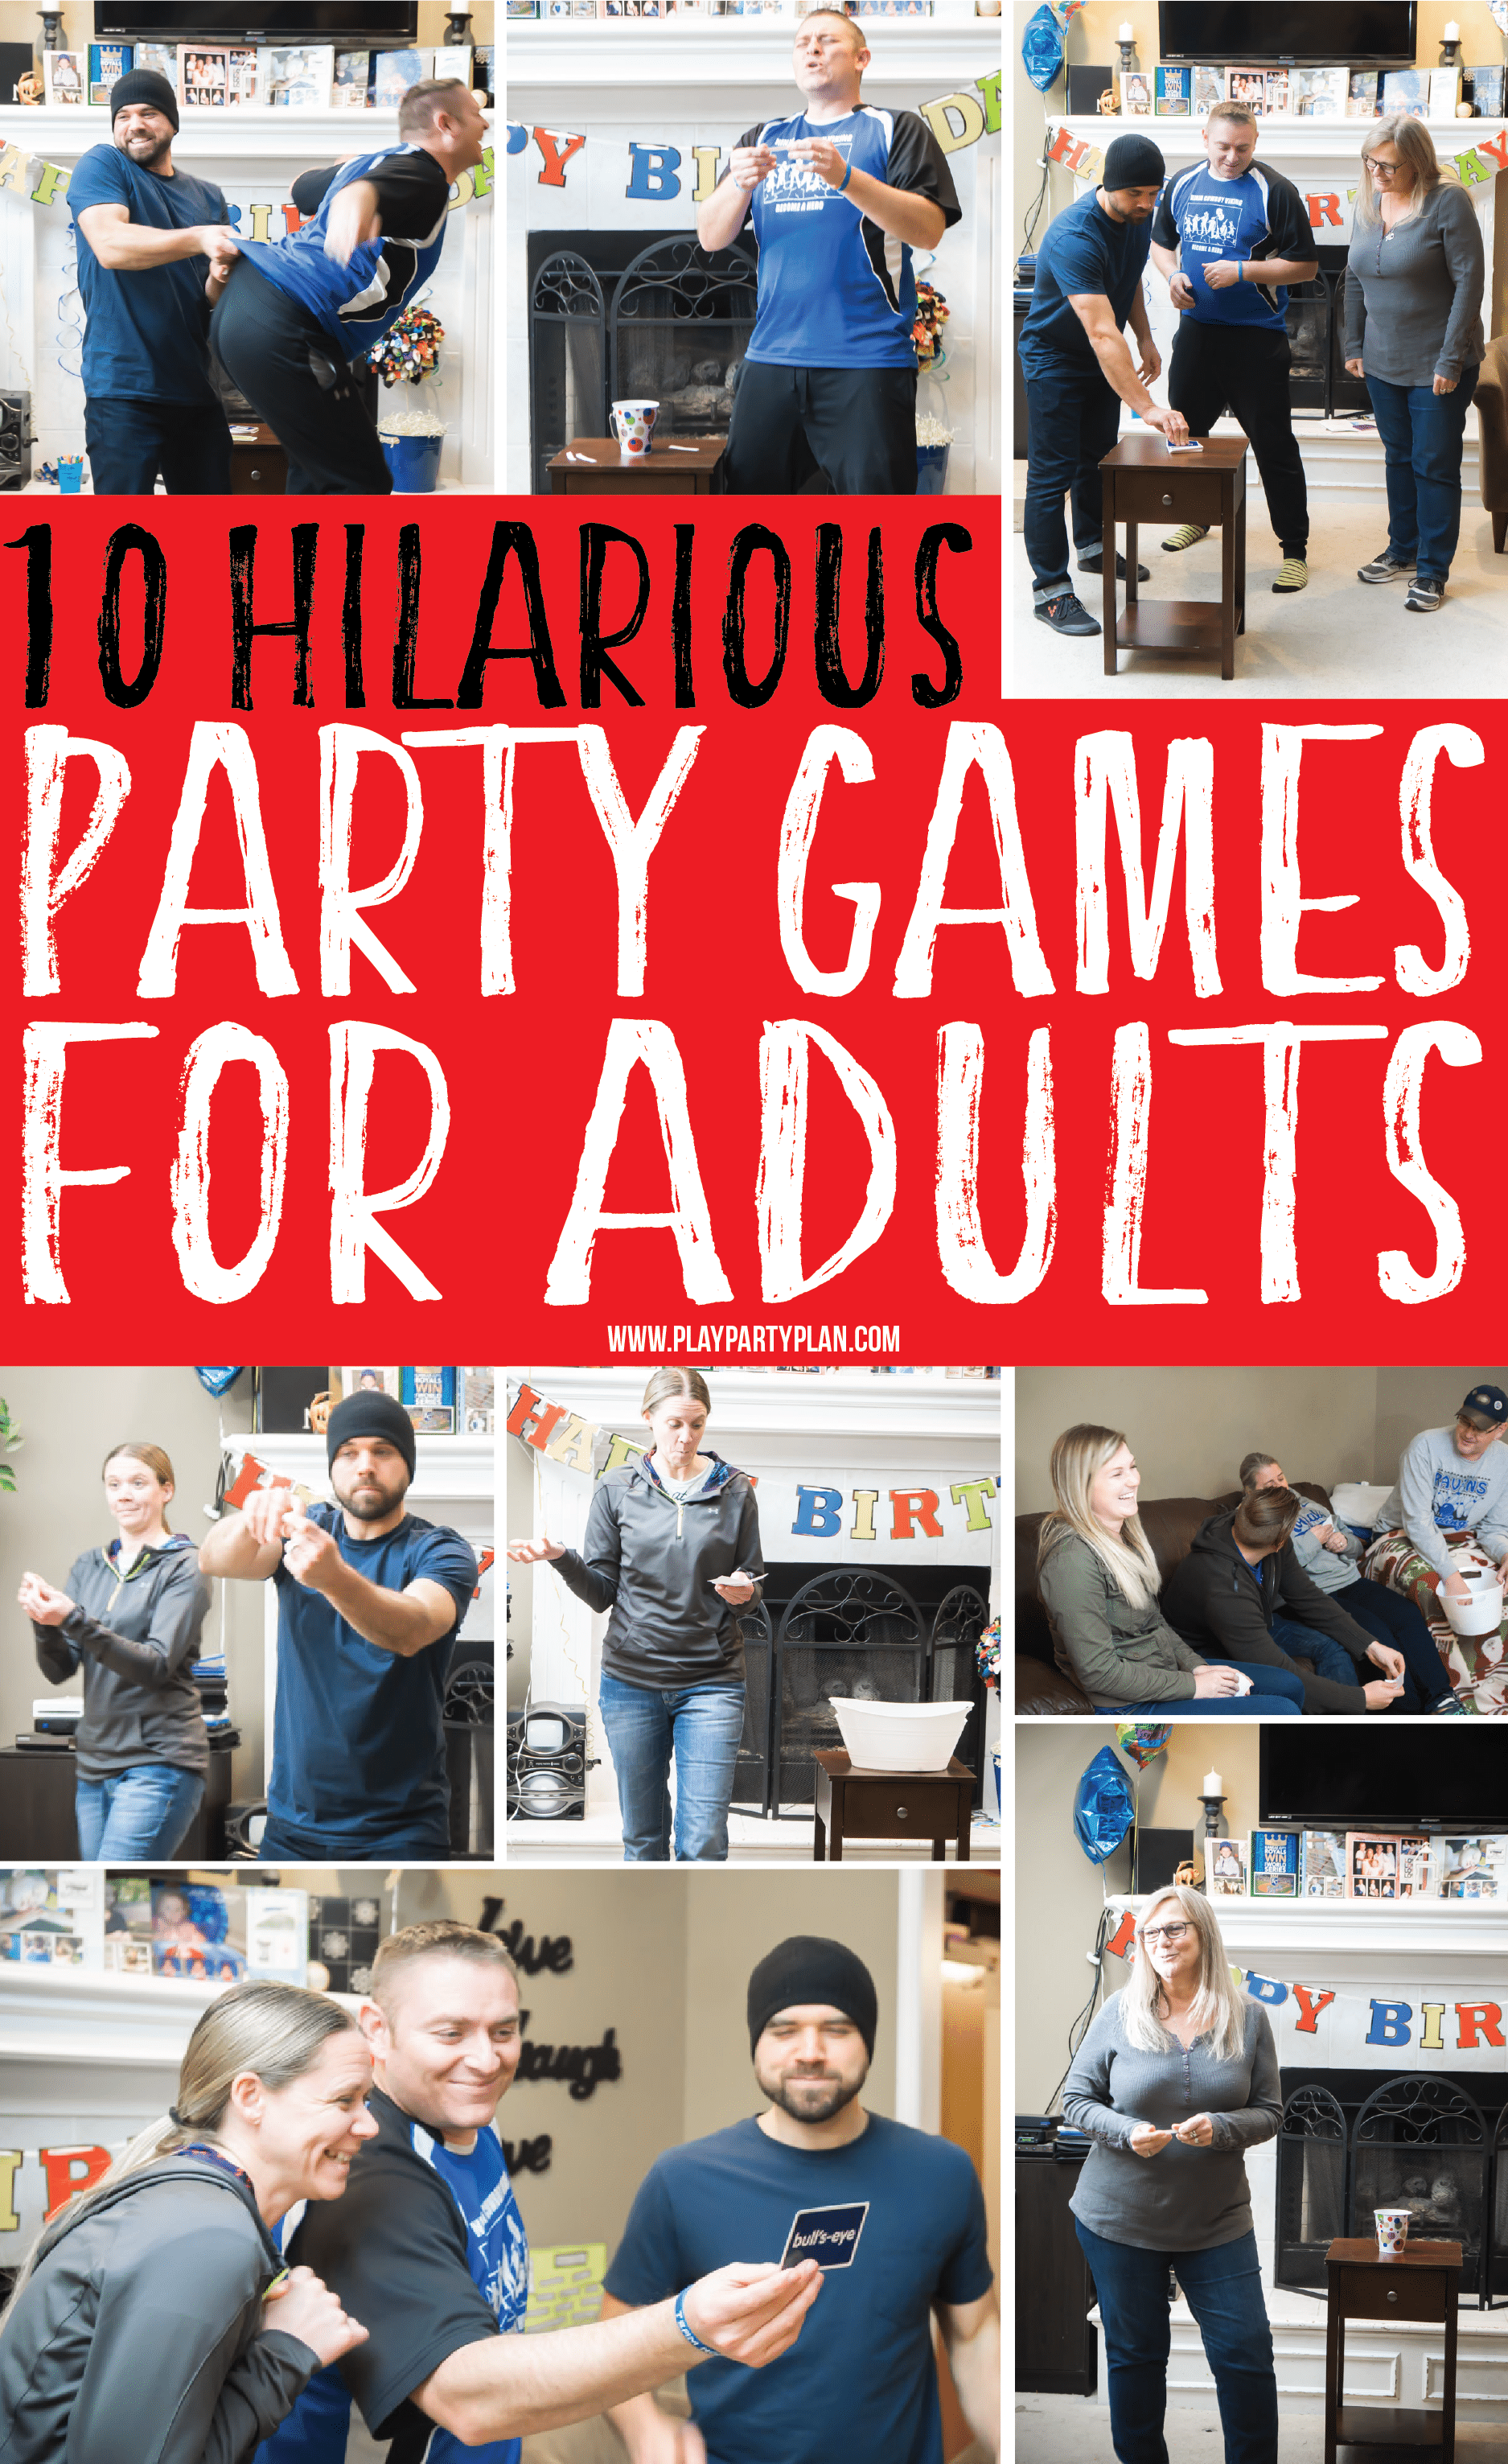 10 hilarious party games for adults that would work great for teens or for groups too! Play indoor or outdoor at a family reunion or birthday party! It doesn’t matter, they’re funny either way! And best of all, no drinking or alcohol required!